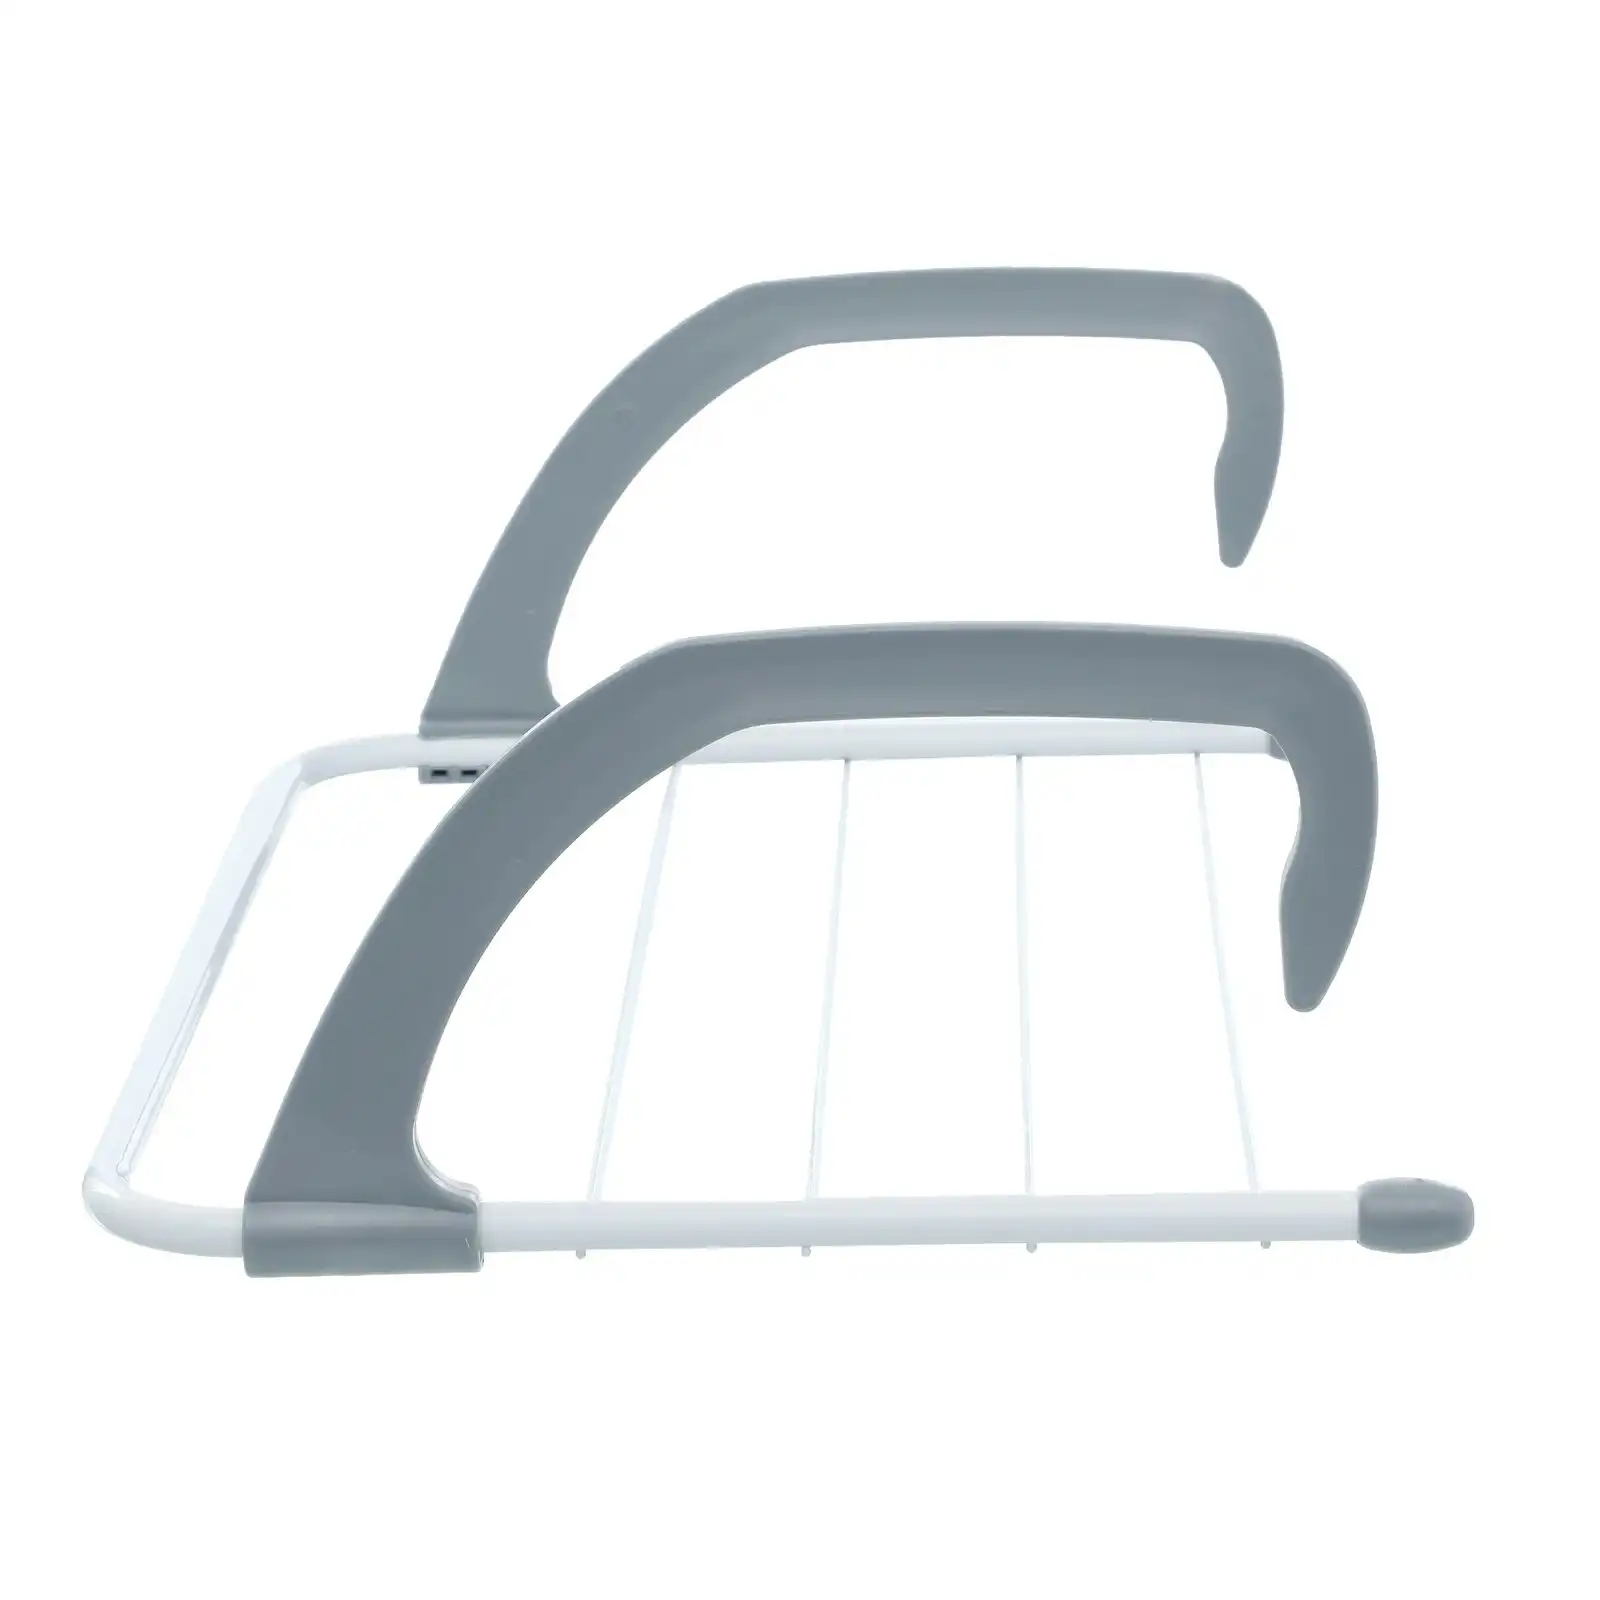 Boxsweden Airer 6 Rails Door Hanging Laundry Drying Rack Clothes Hanger Stand